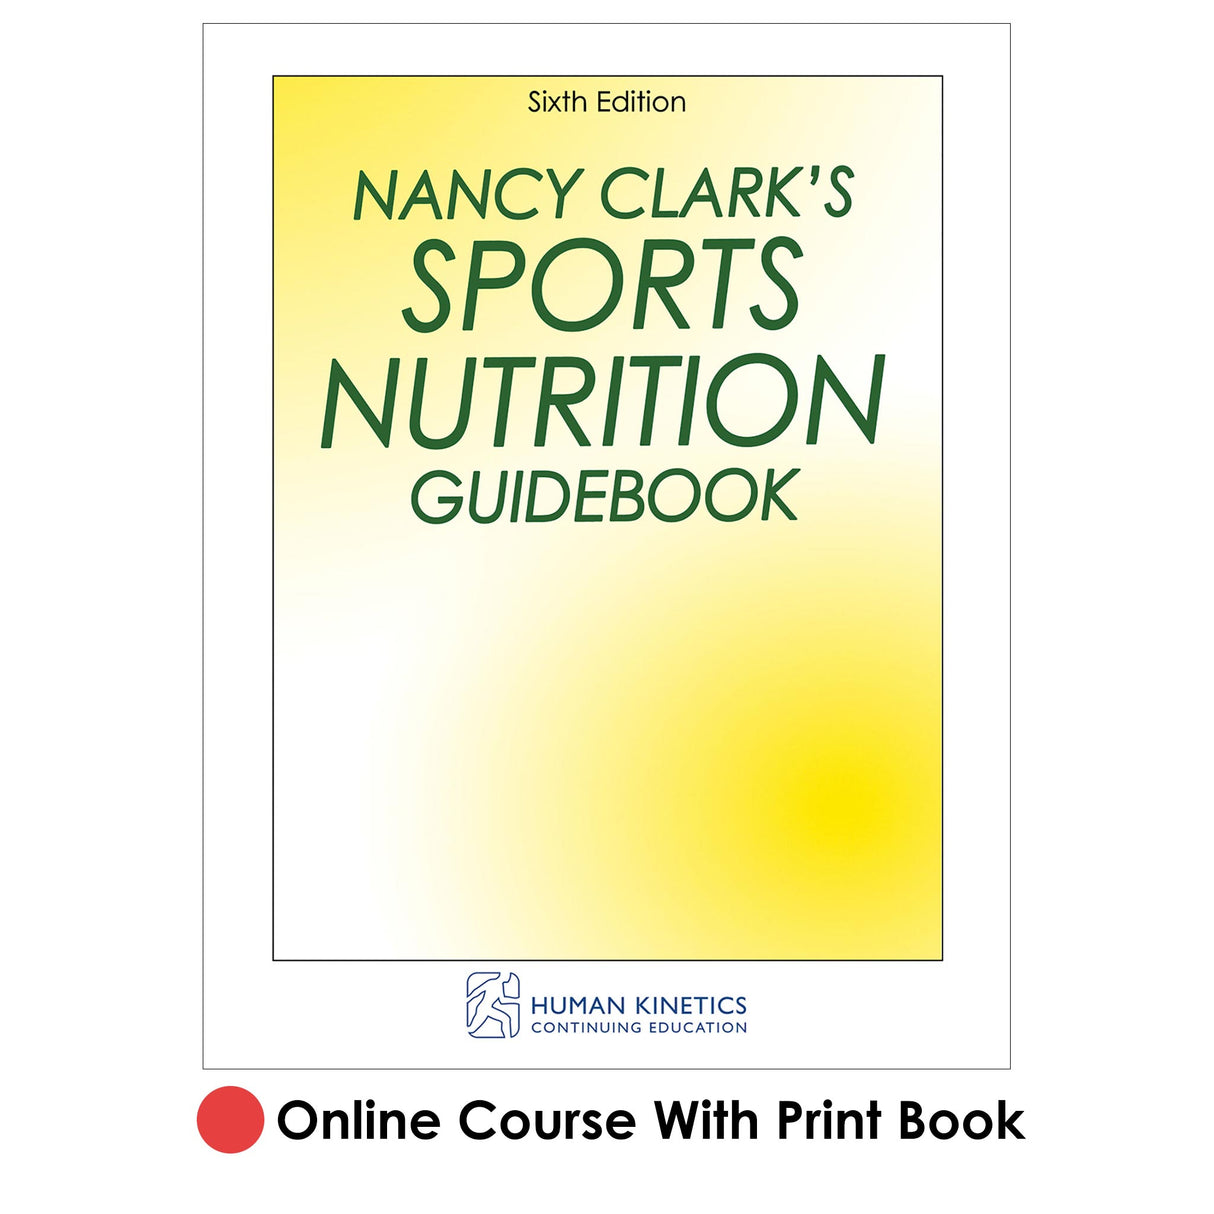 Nancy Clark's Sports Nutrition Guidebook 6th Edition Online CE Course With Print Book